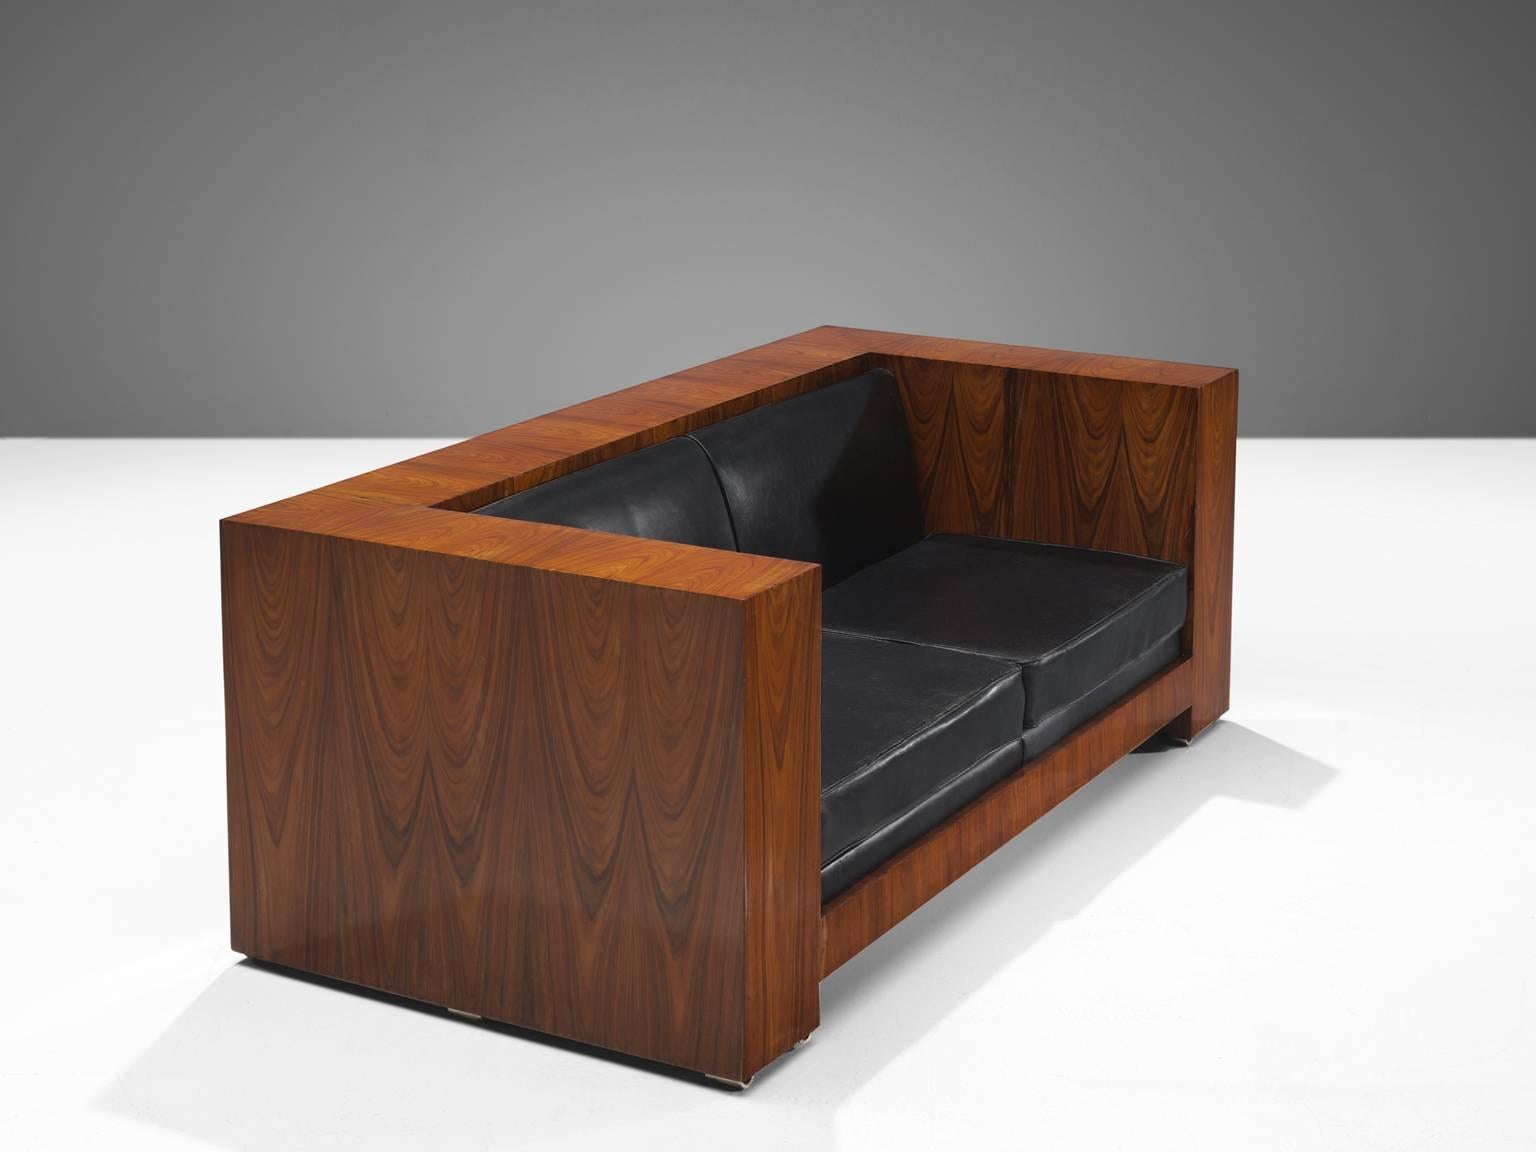 Settee, black leather, rosewood, Italy, circa 1965

This two-seat 'basket' sofas is designed around 1965. The two-seat leather cushions fall perfectly in the rosewood frame. The design of this sofa is very geometric as the sides of the sofa are